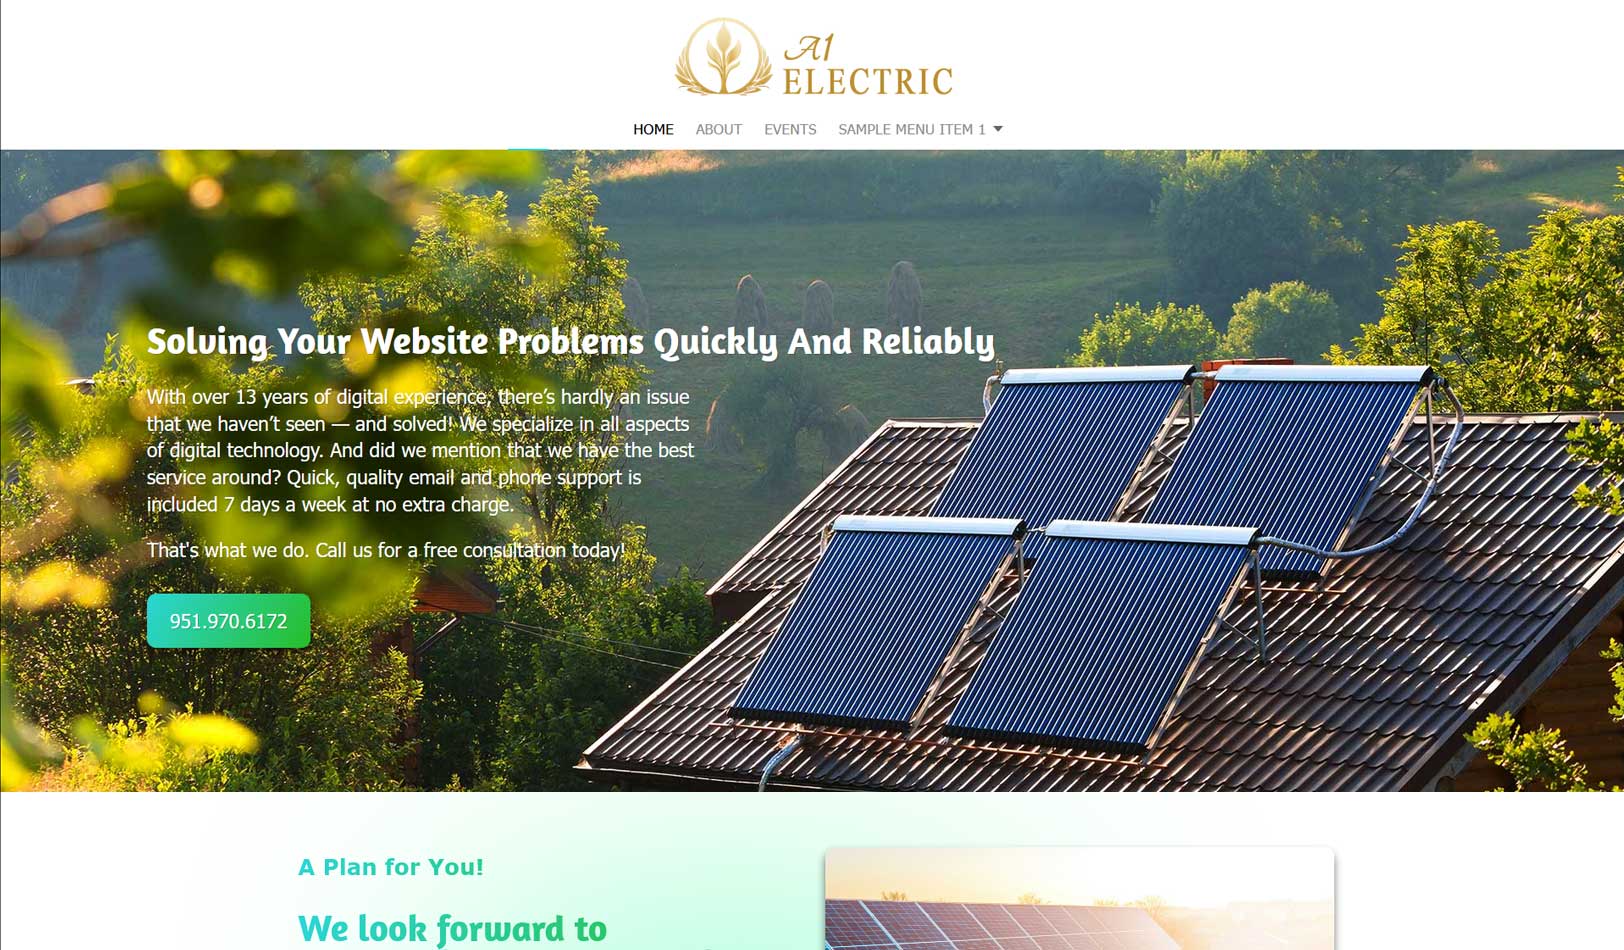 images/Portfolio-images/Our-Custom-Website-Themes/a1-electric.jpg#joomlaImage://local-images/Portfolio-images/Our-Custom-Website-Themes/a1-electric.jpg?width=1624&height=950